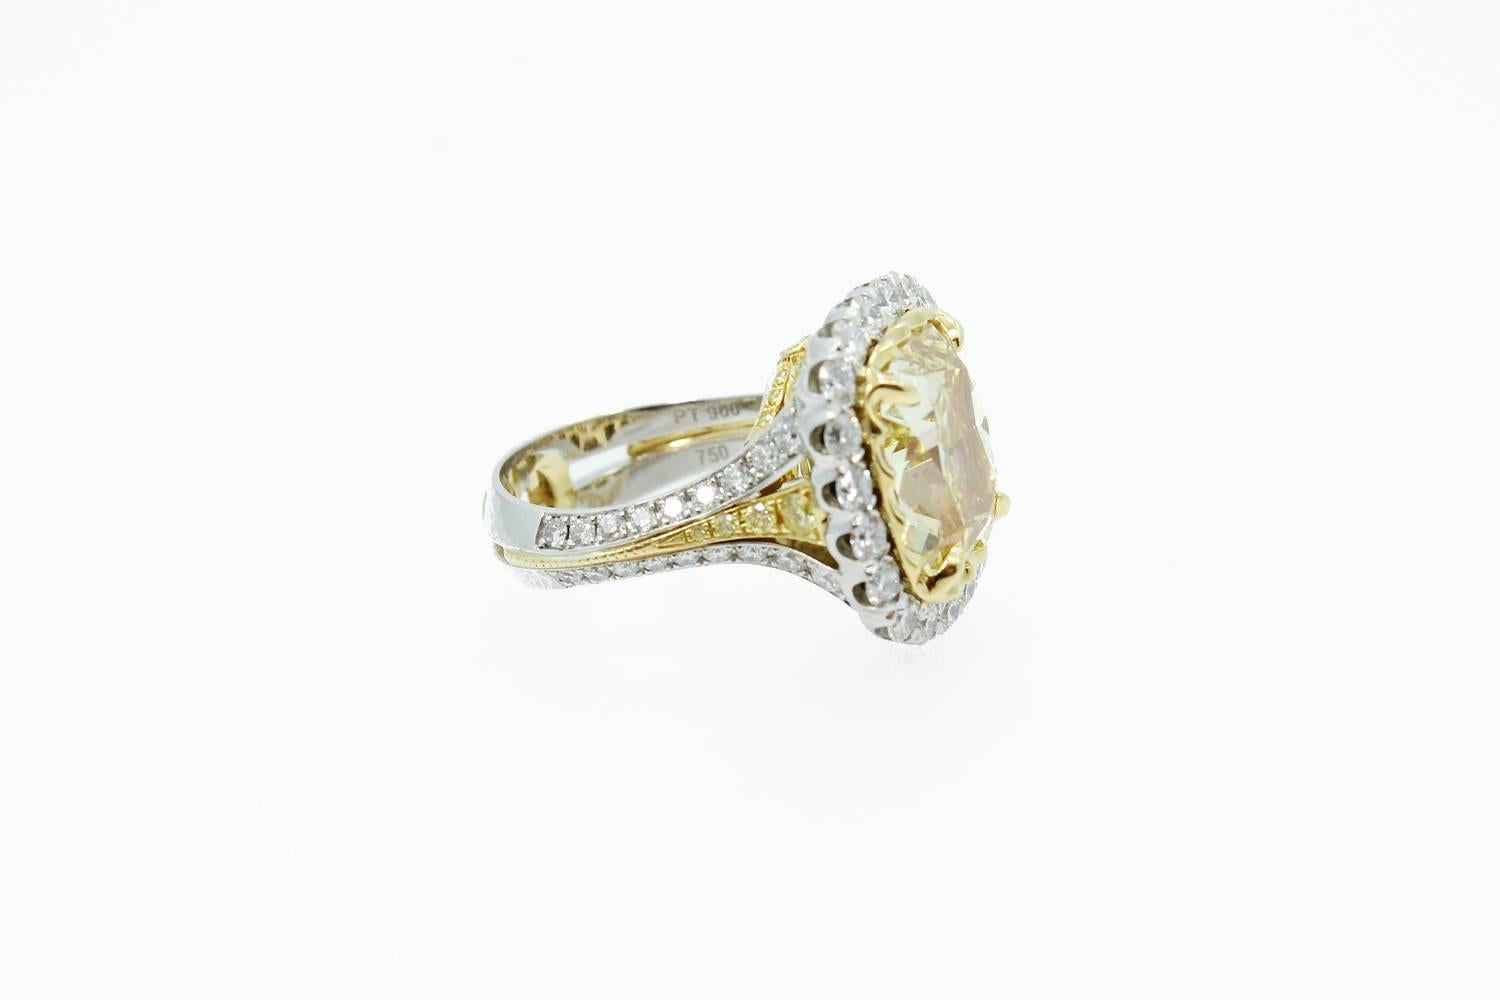 Platinum and 18K Yellow Gold Christopher Design Ring with a Crisscut 10.09 carat Fancy Yellow Diamond Clarity SI1 Center Stone. GIA Report# 0000. The mounting has 2.39 carats total weight of Round Brilliant Cut Diamonds. The ring is a size 6.5.